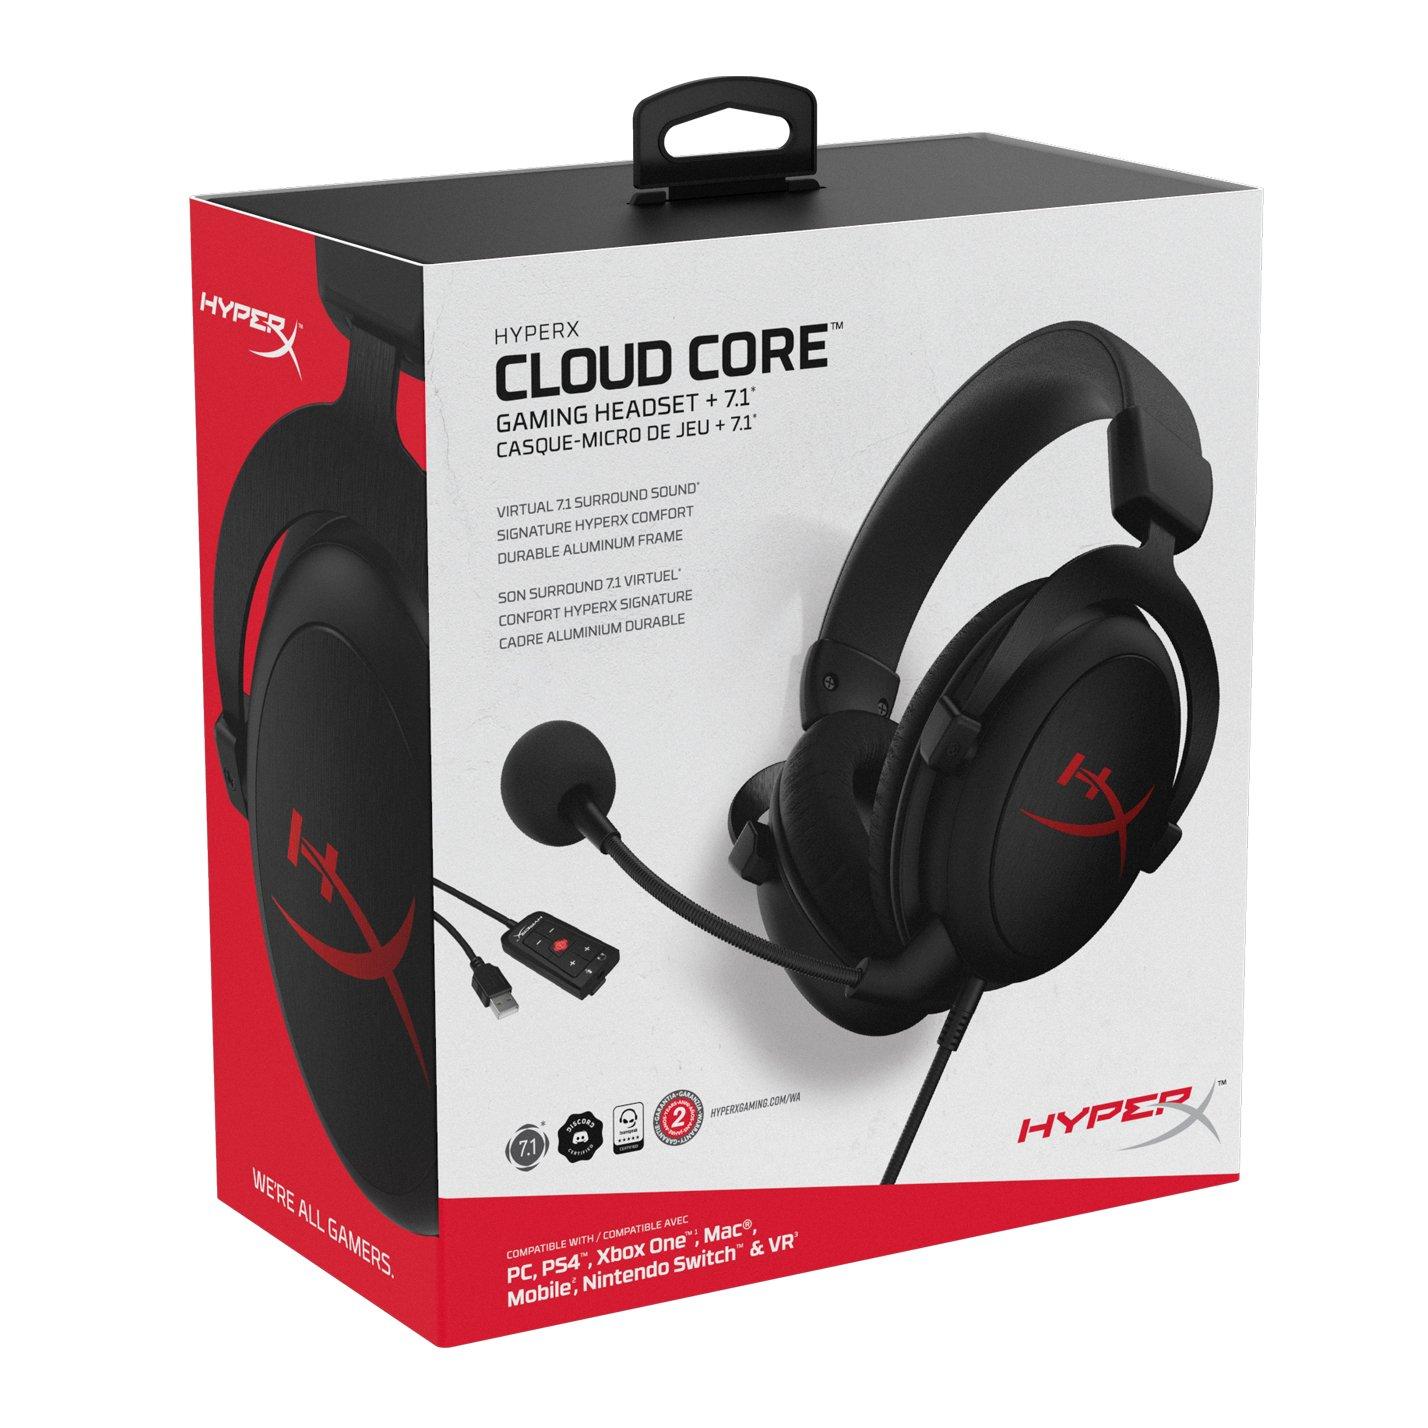 HyperX Cloud 2 II Gaming Headphones Noise Cancelling,7.1 Surround Compute  Headset Earphones Microphone Wired headset for PC PS4